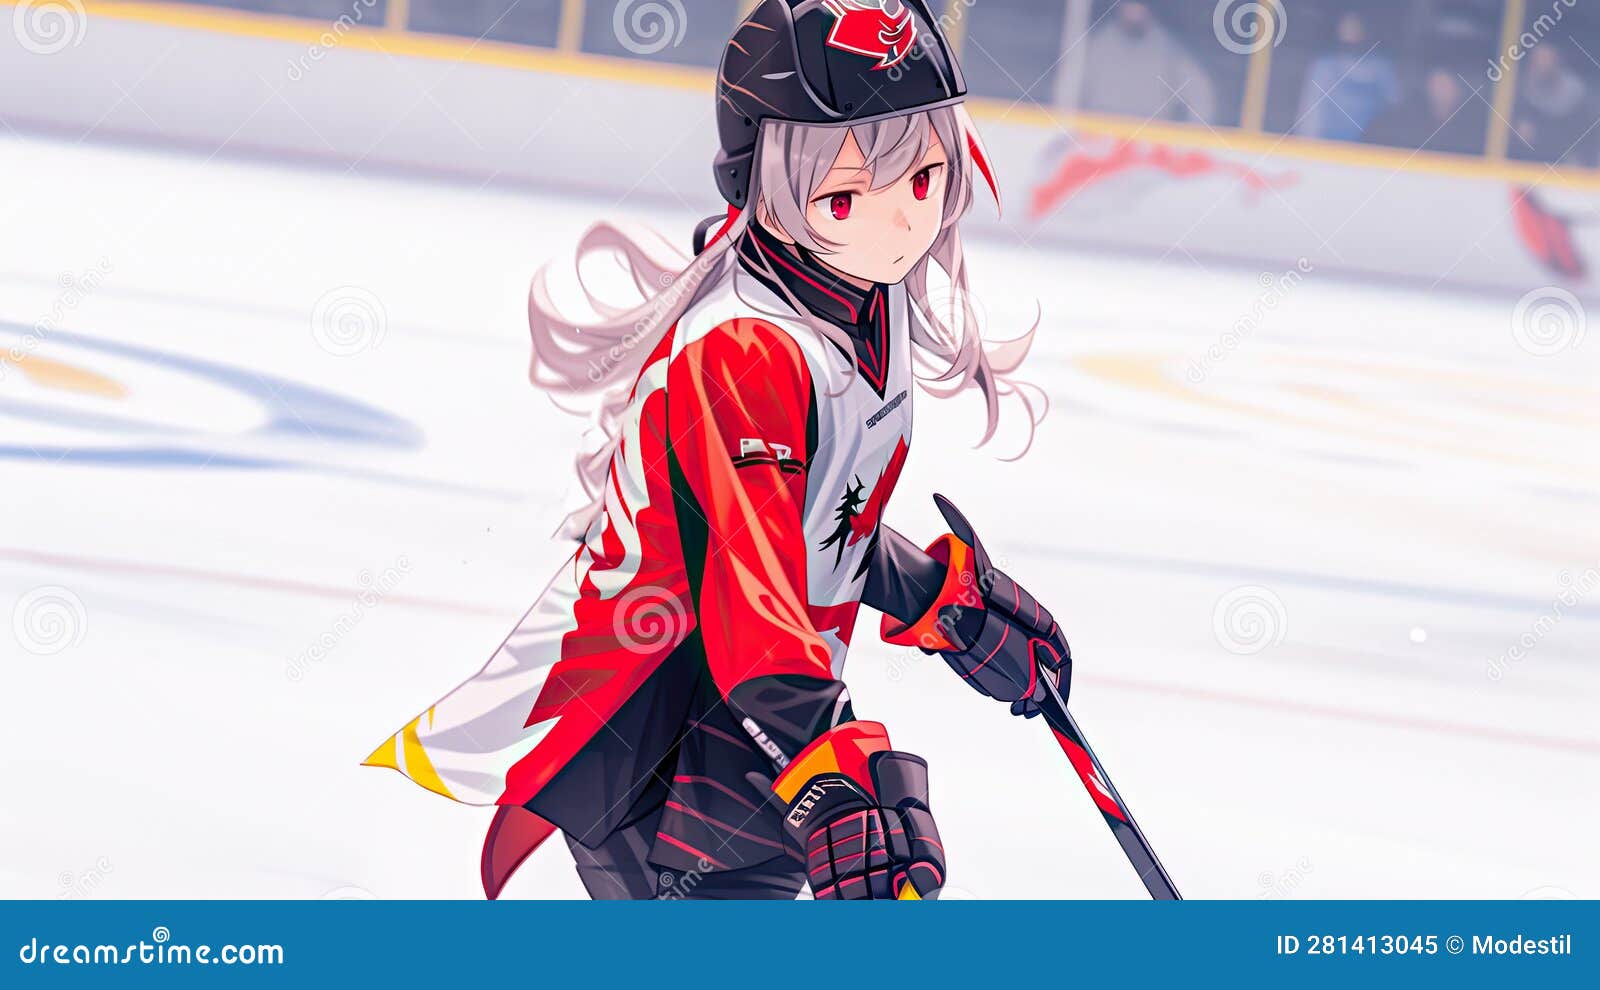 Best Hockey Anime and Manga Go Ahead Is Not The Only One